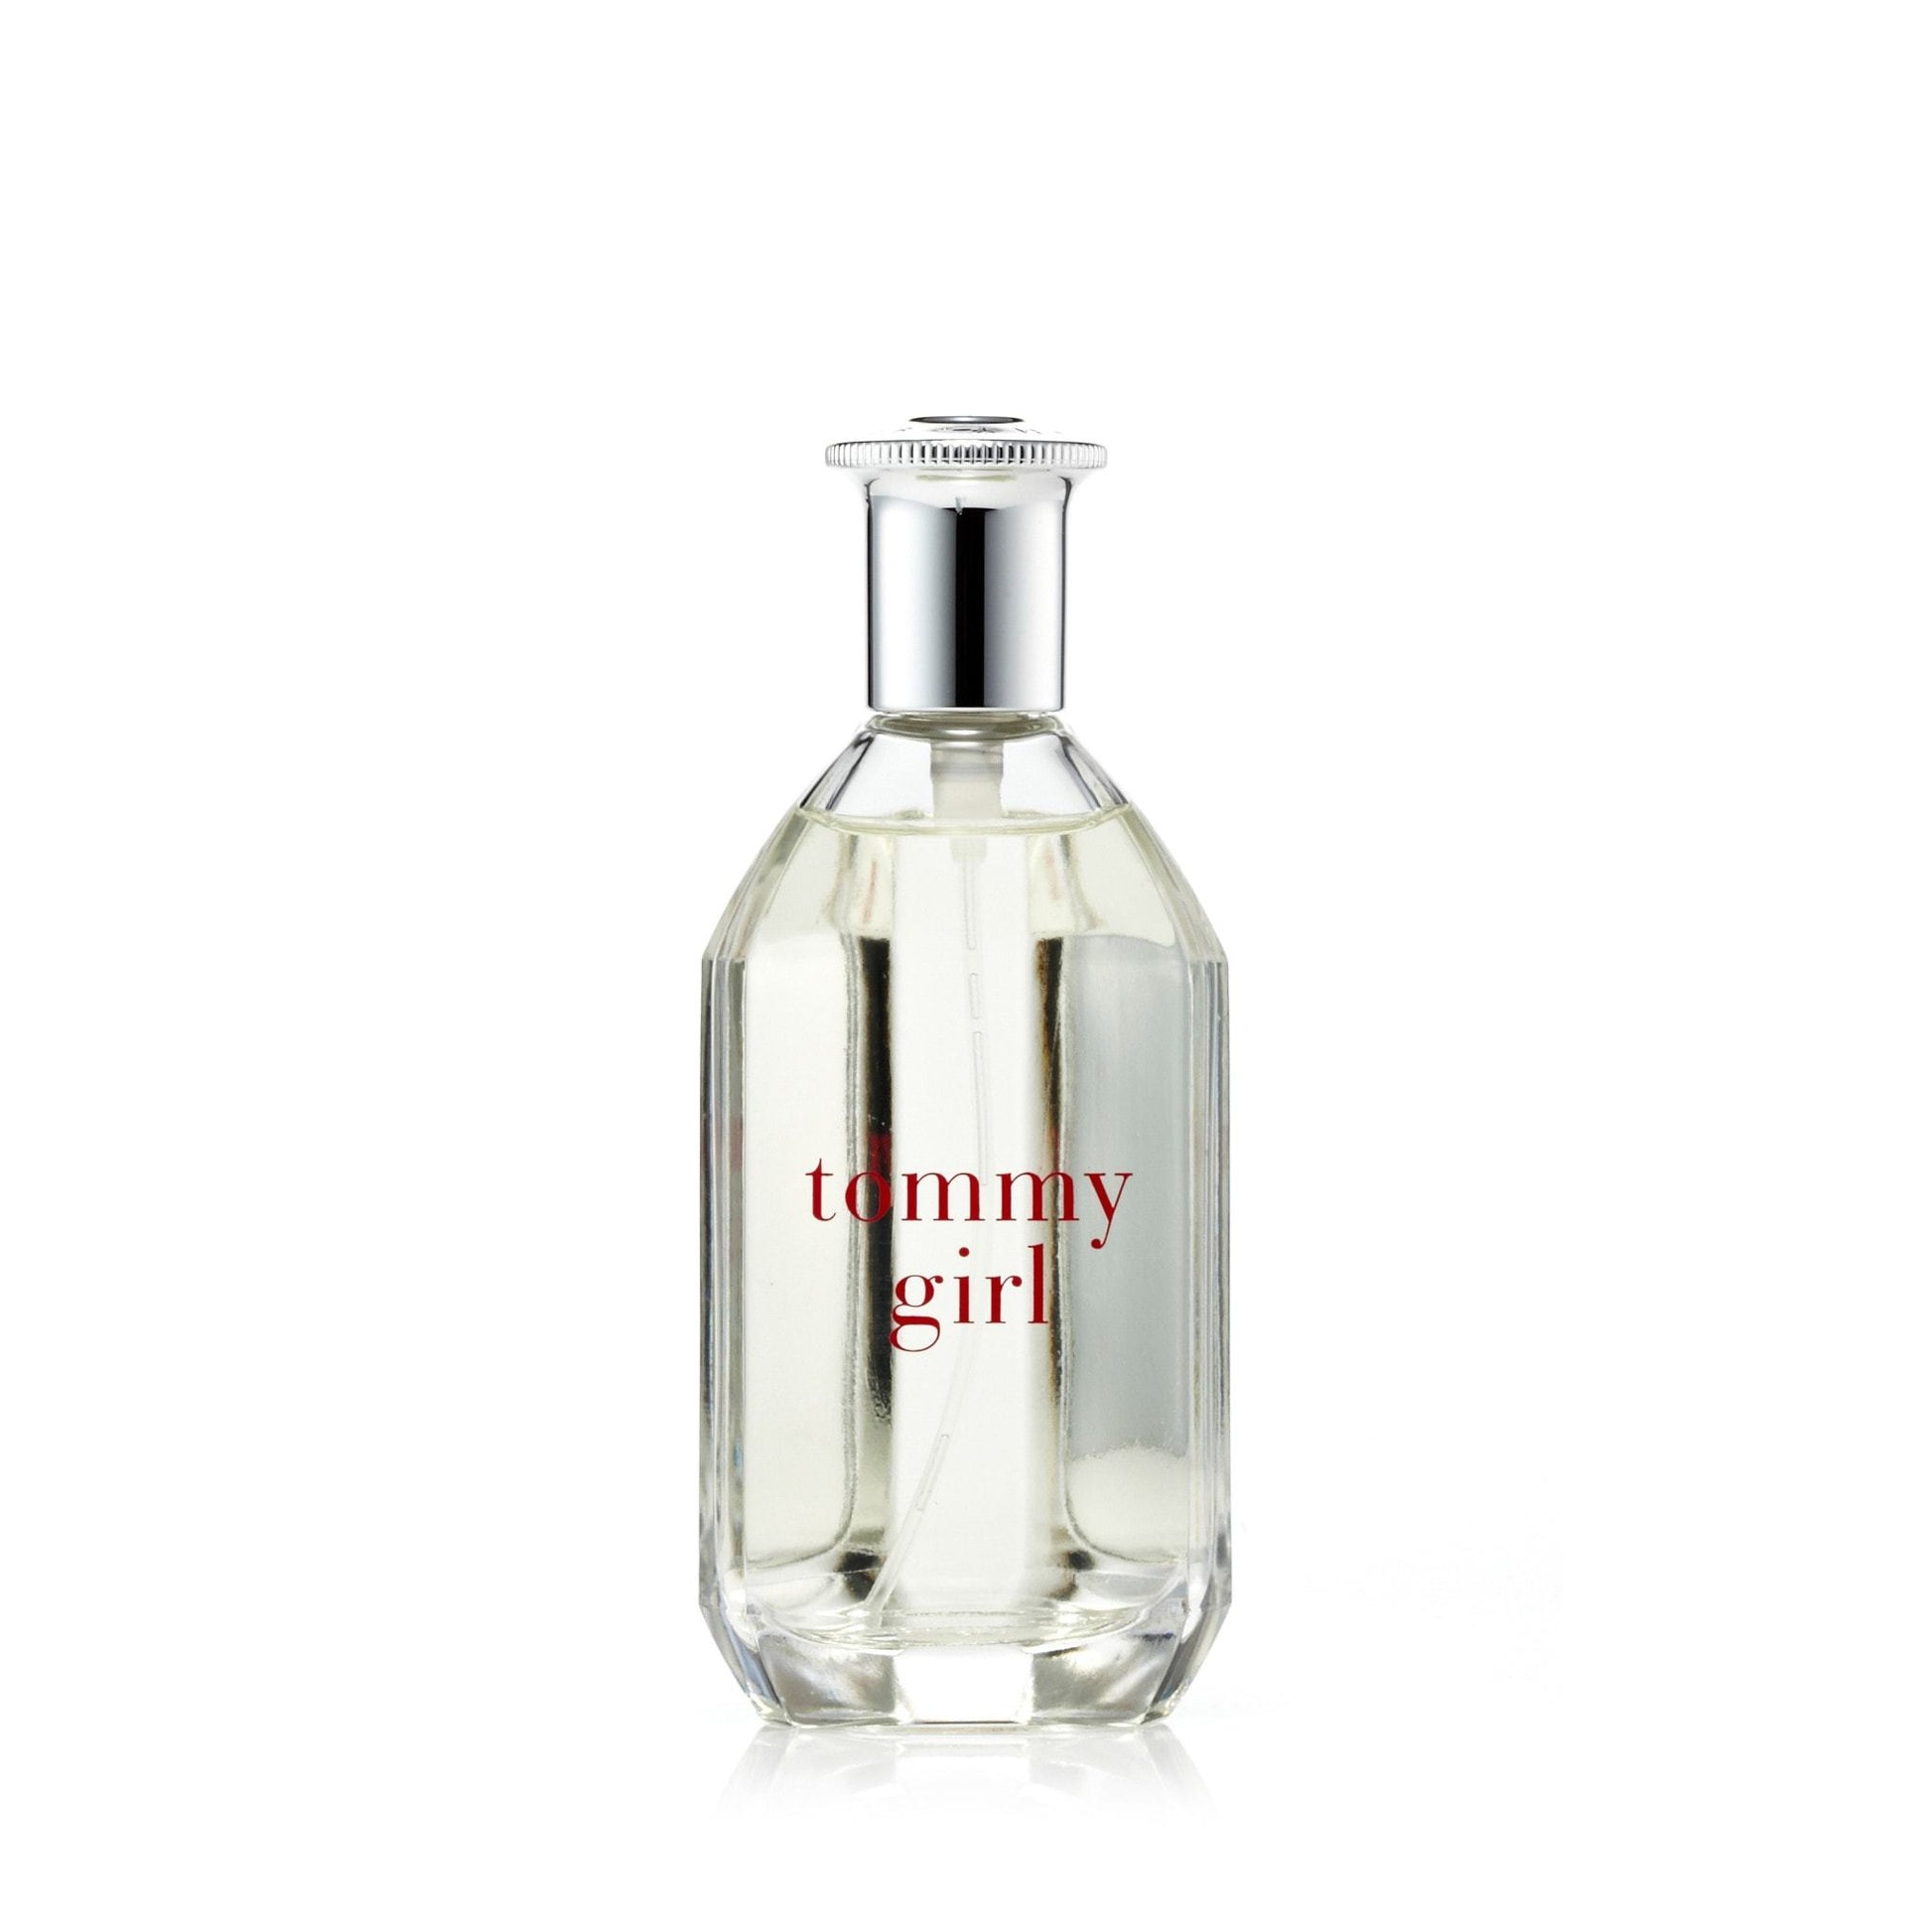 Tommy Girl Eau de Toilette Spray for Women by Tommy Hilfiger, Product image 1